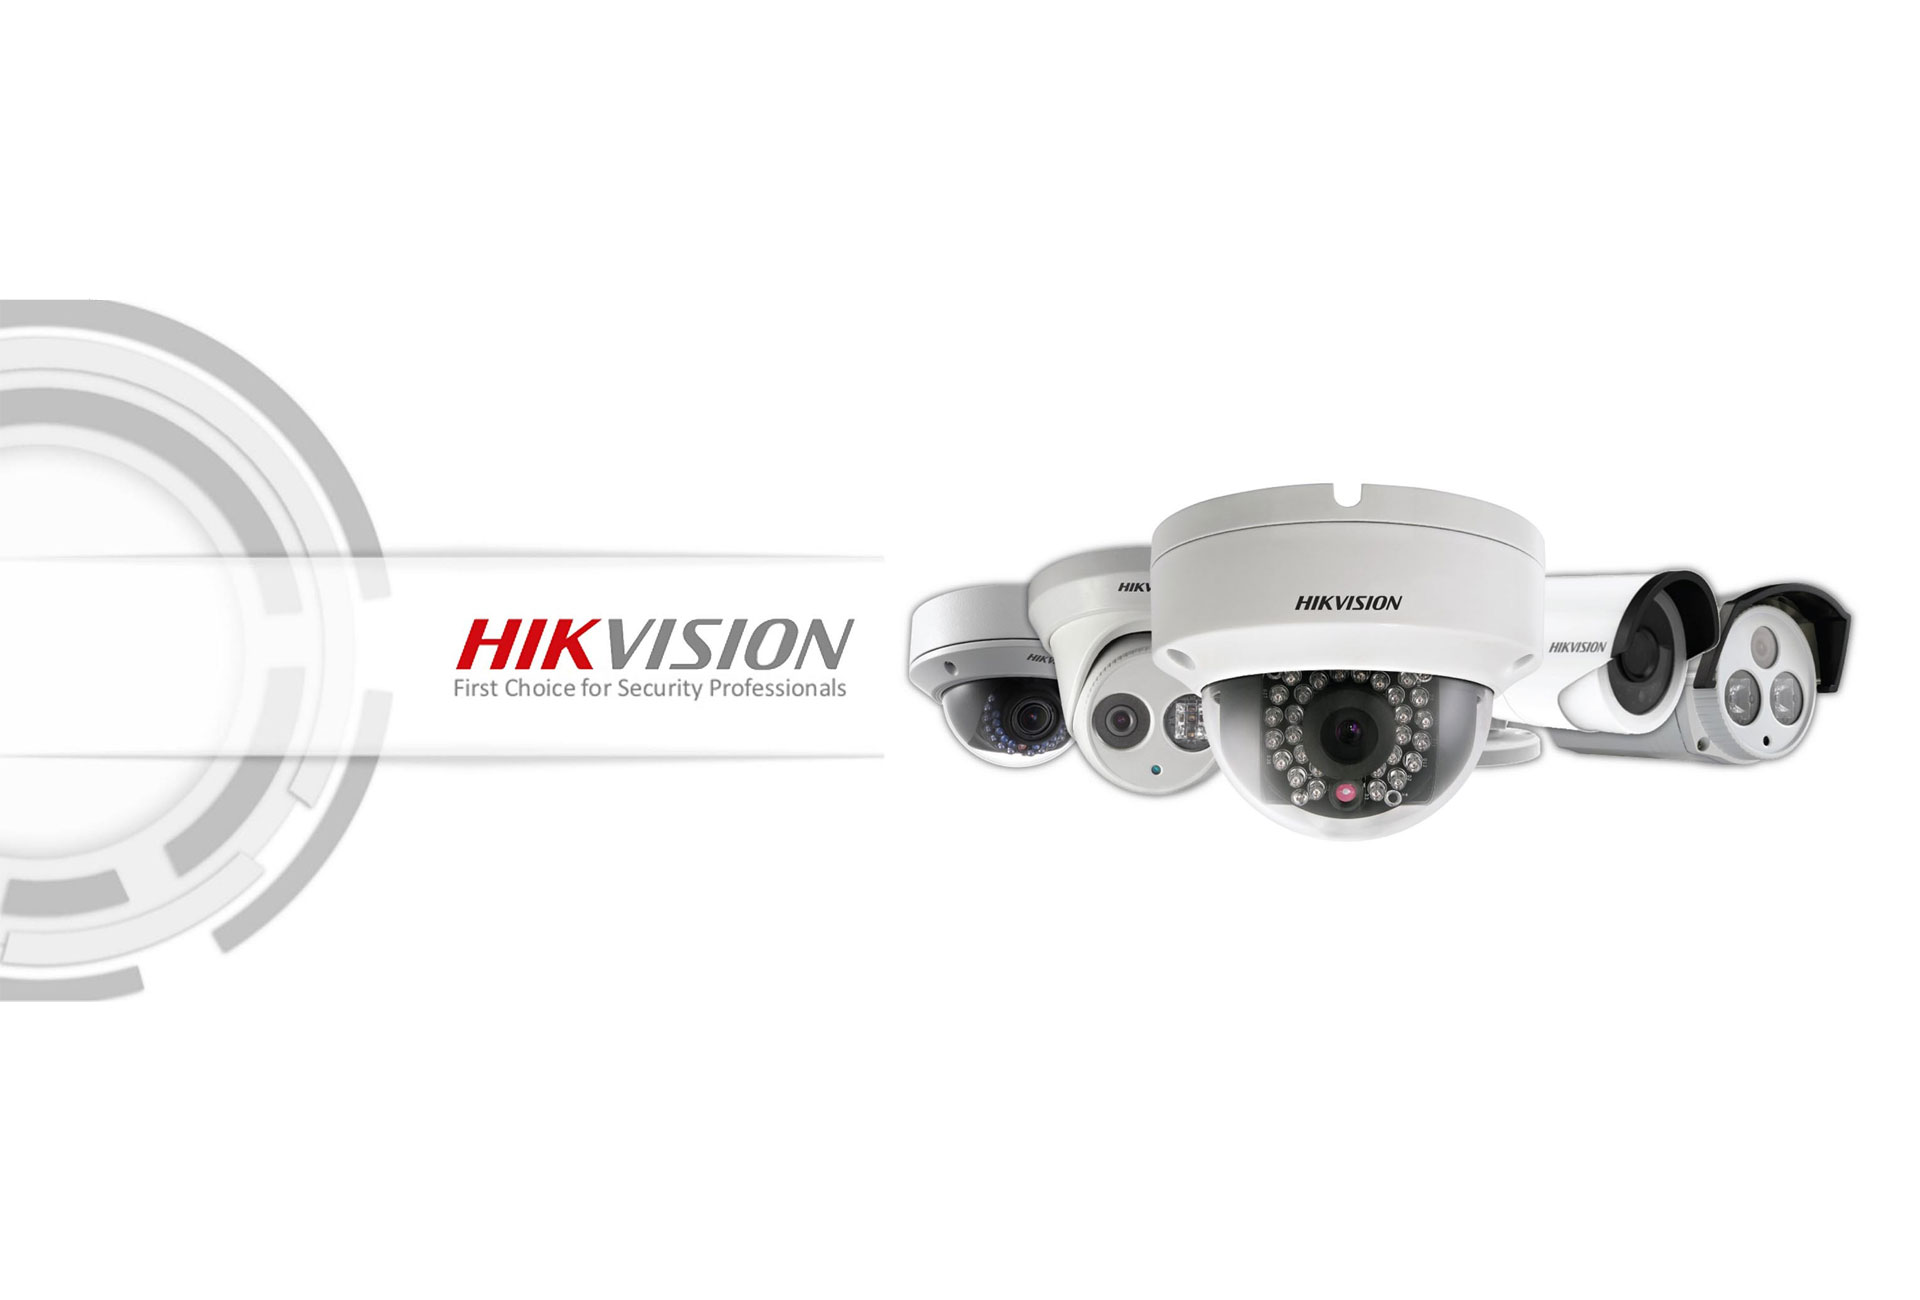 hikvision dealers in faridabad